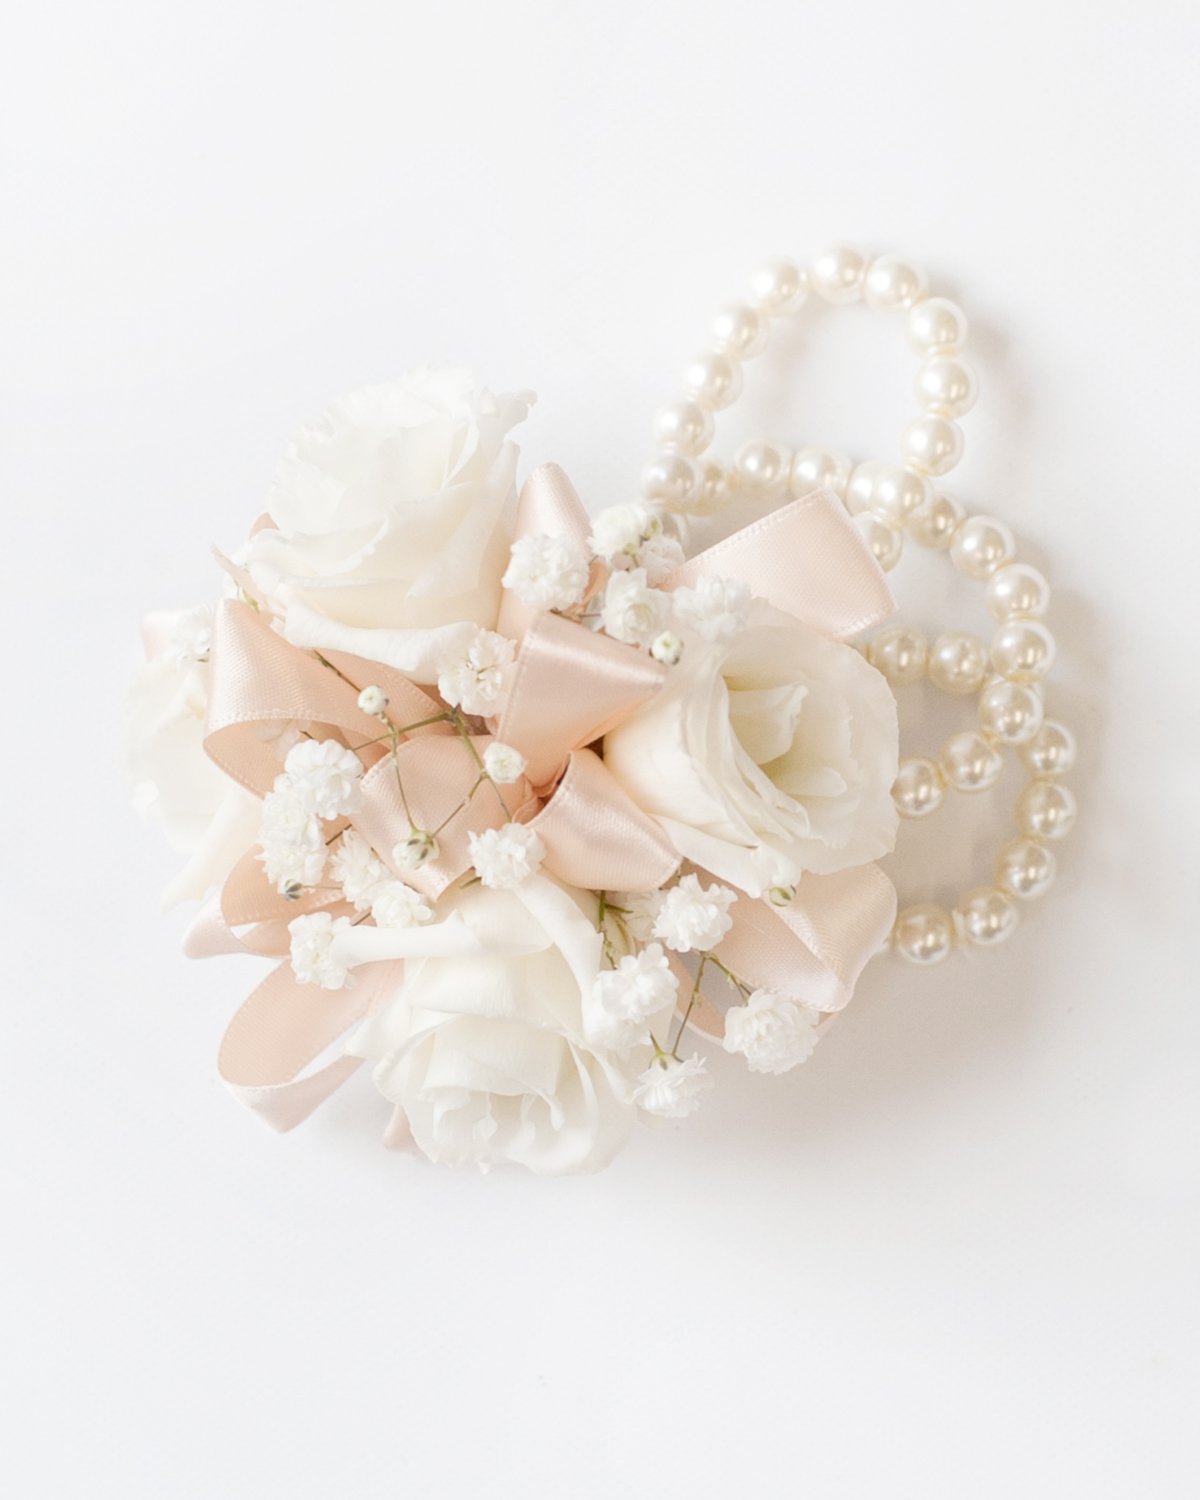 All of our wrist corsages come with an elastic pearl band so that they can be comfortably worn and look beautiful. 

Mother's can also opt for a mini bouquet to carry. 

So what can we create for your special day?

#daytonweddingflorist #daytonweddin